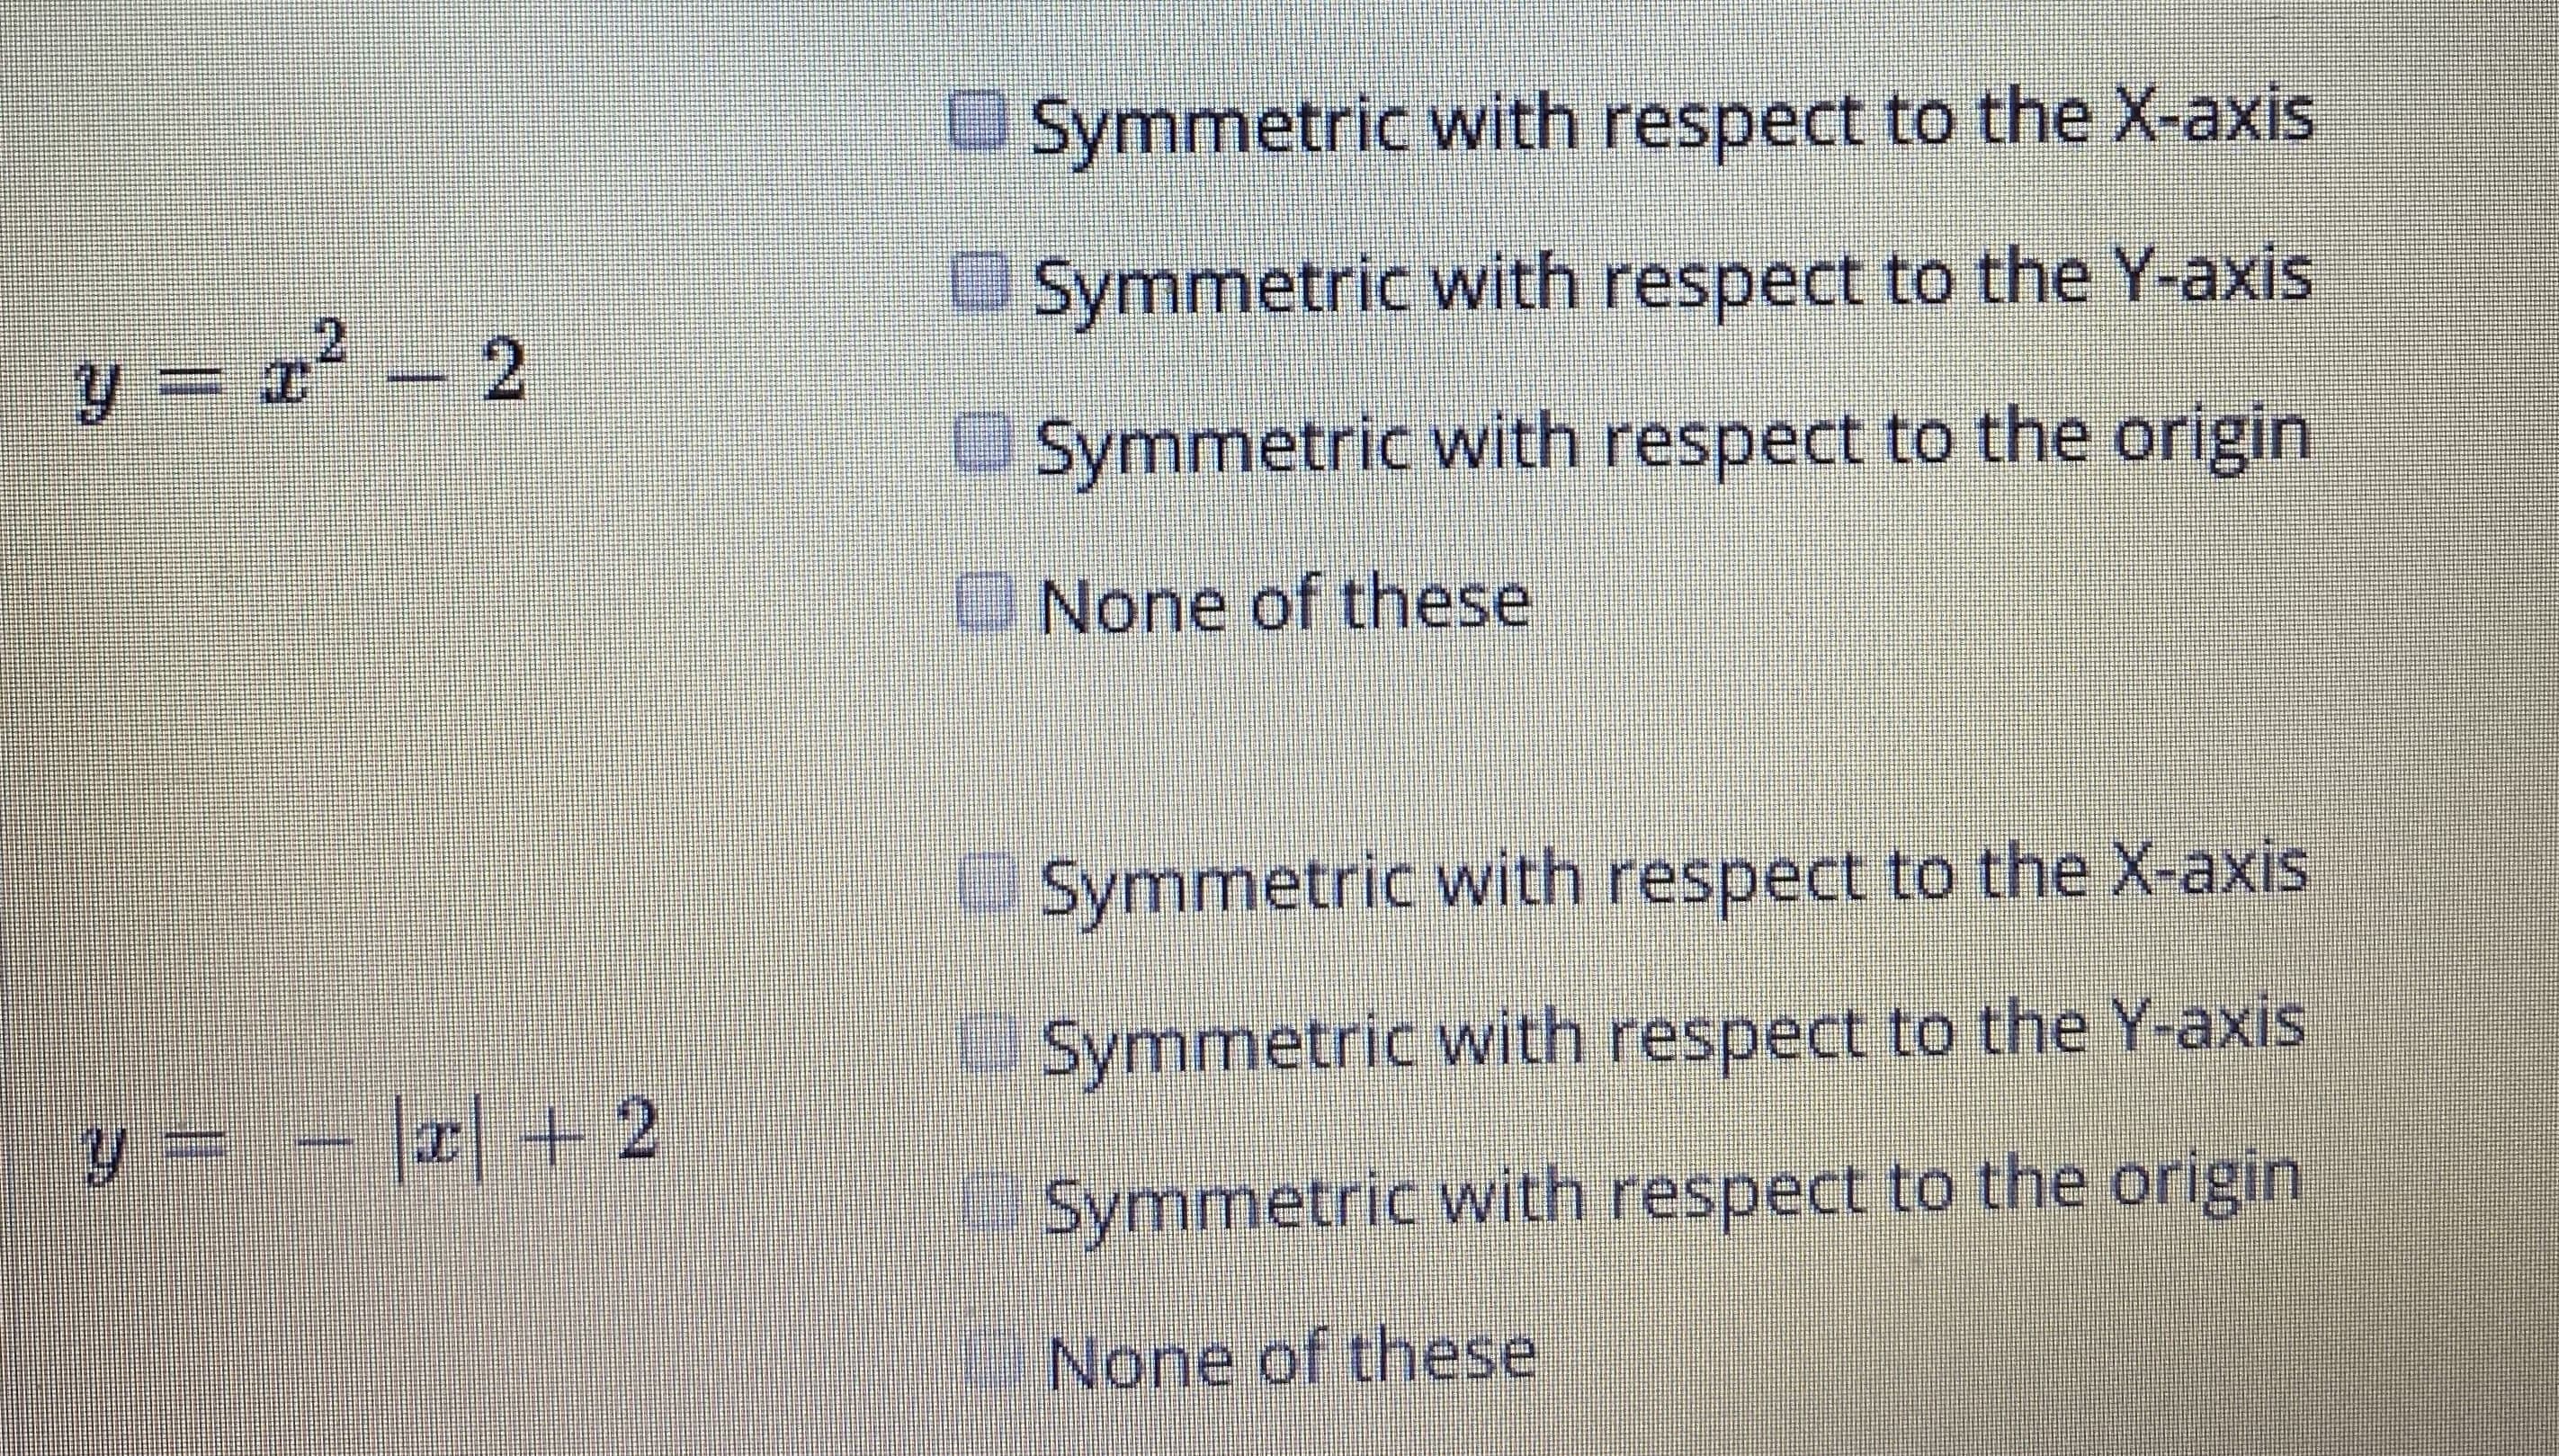 OSymmetric with respect to the X-axis
USymmetric with respect to the Y-axis
y = 2' - 2
OSymmetric with respect to the origin
ONone of these
Symmetric with respect to the X-axis
Symmetric with respect to the Y-axis
Symmetric with respect to the origin
None of these
